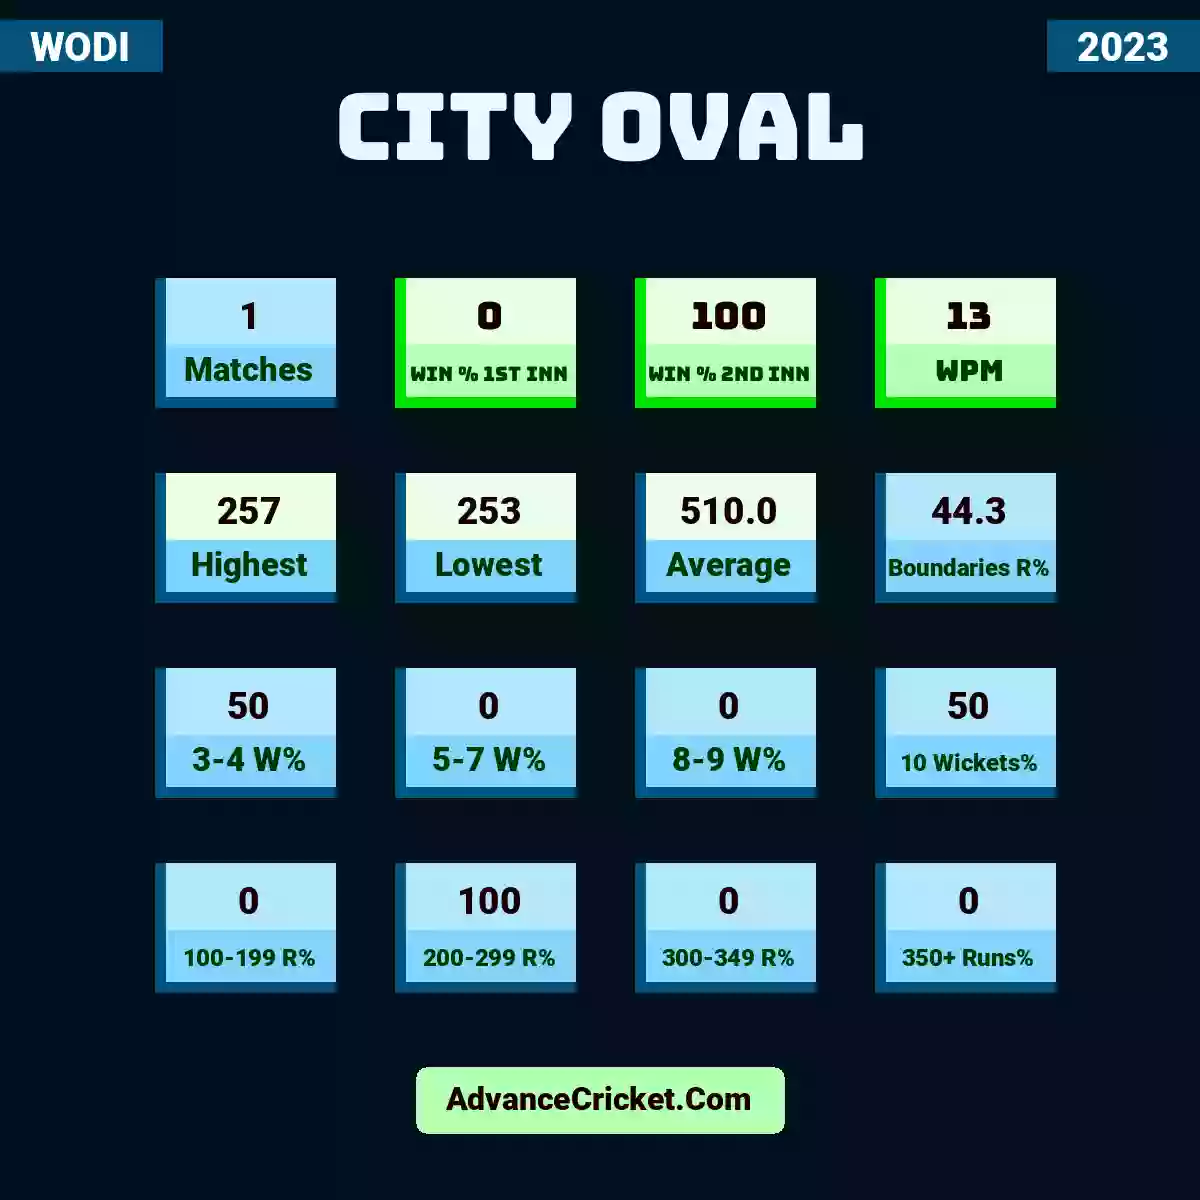 Image showing City Oval with Matches: 1, Win % 1st Inn: 0, Win % 2nd Inn: 100, WPM: 13, Highest: 257, Lowest: 253, Average: 510.0, Boundaries R%: 44.3, 3-4 W%: 50, 5-7 W%: 0, 8-9 W%: 0, 10 Wickets%: 50, 100-199 R%: 0, 200-299 R%: 100, 300-349 R%: 0, 350+ Runs%: 0.